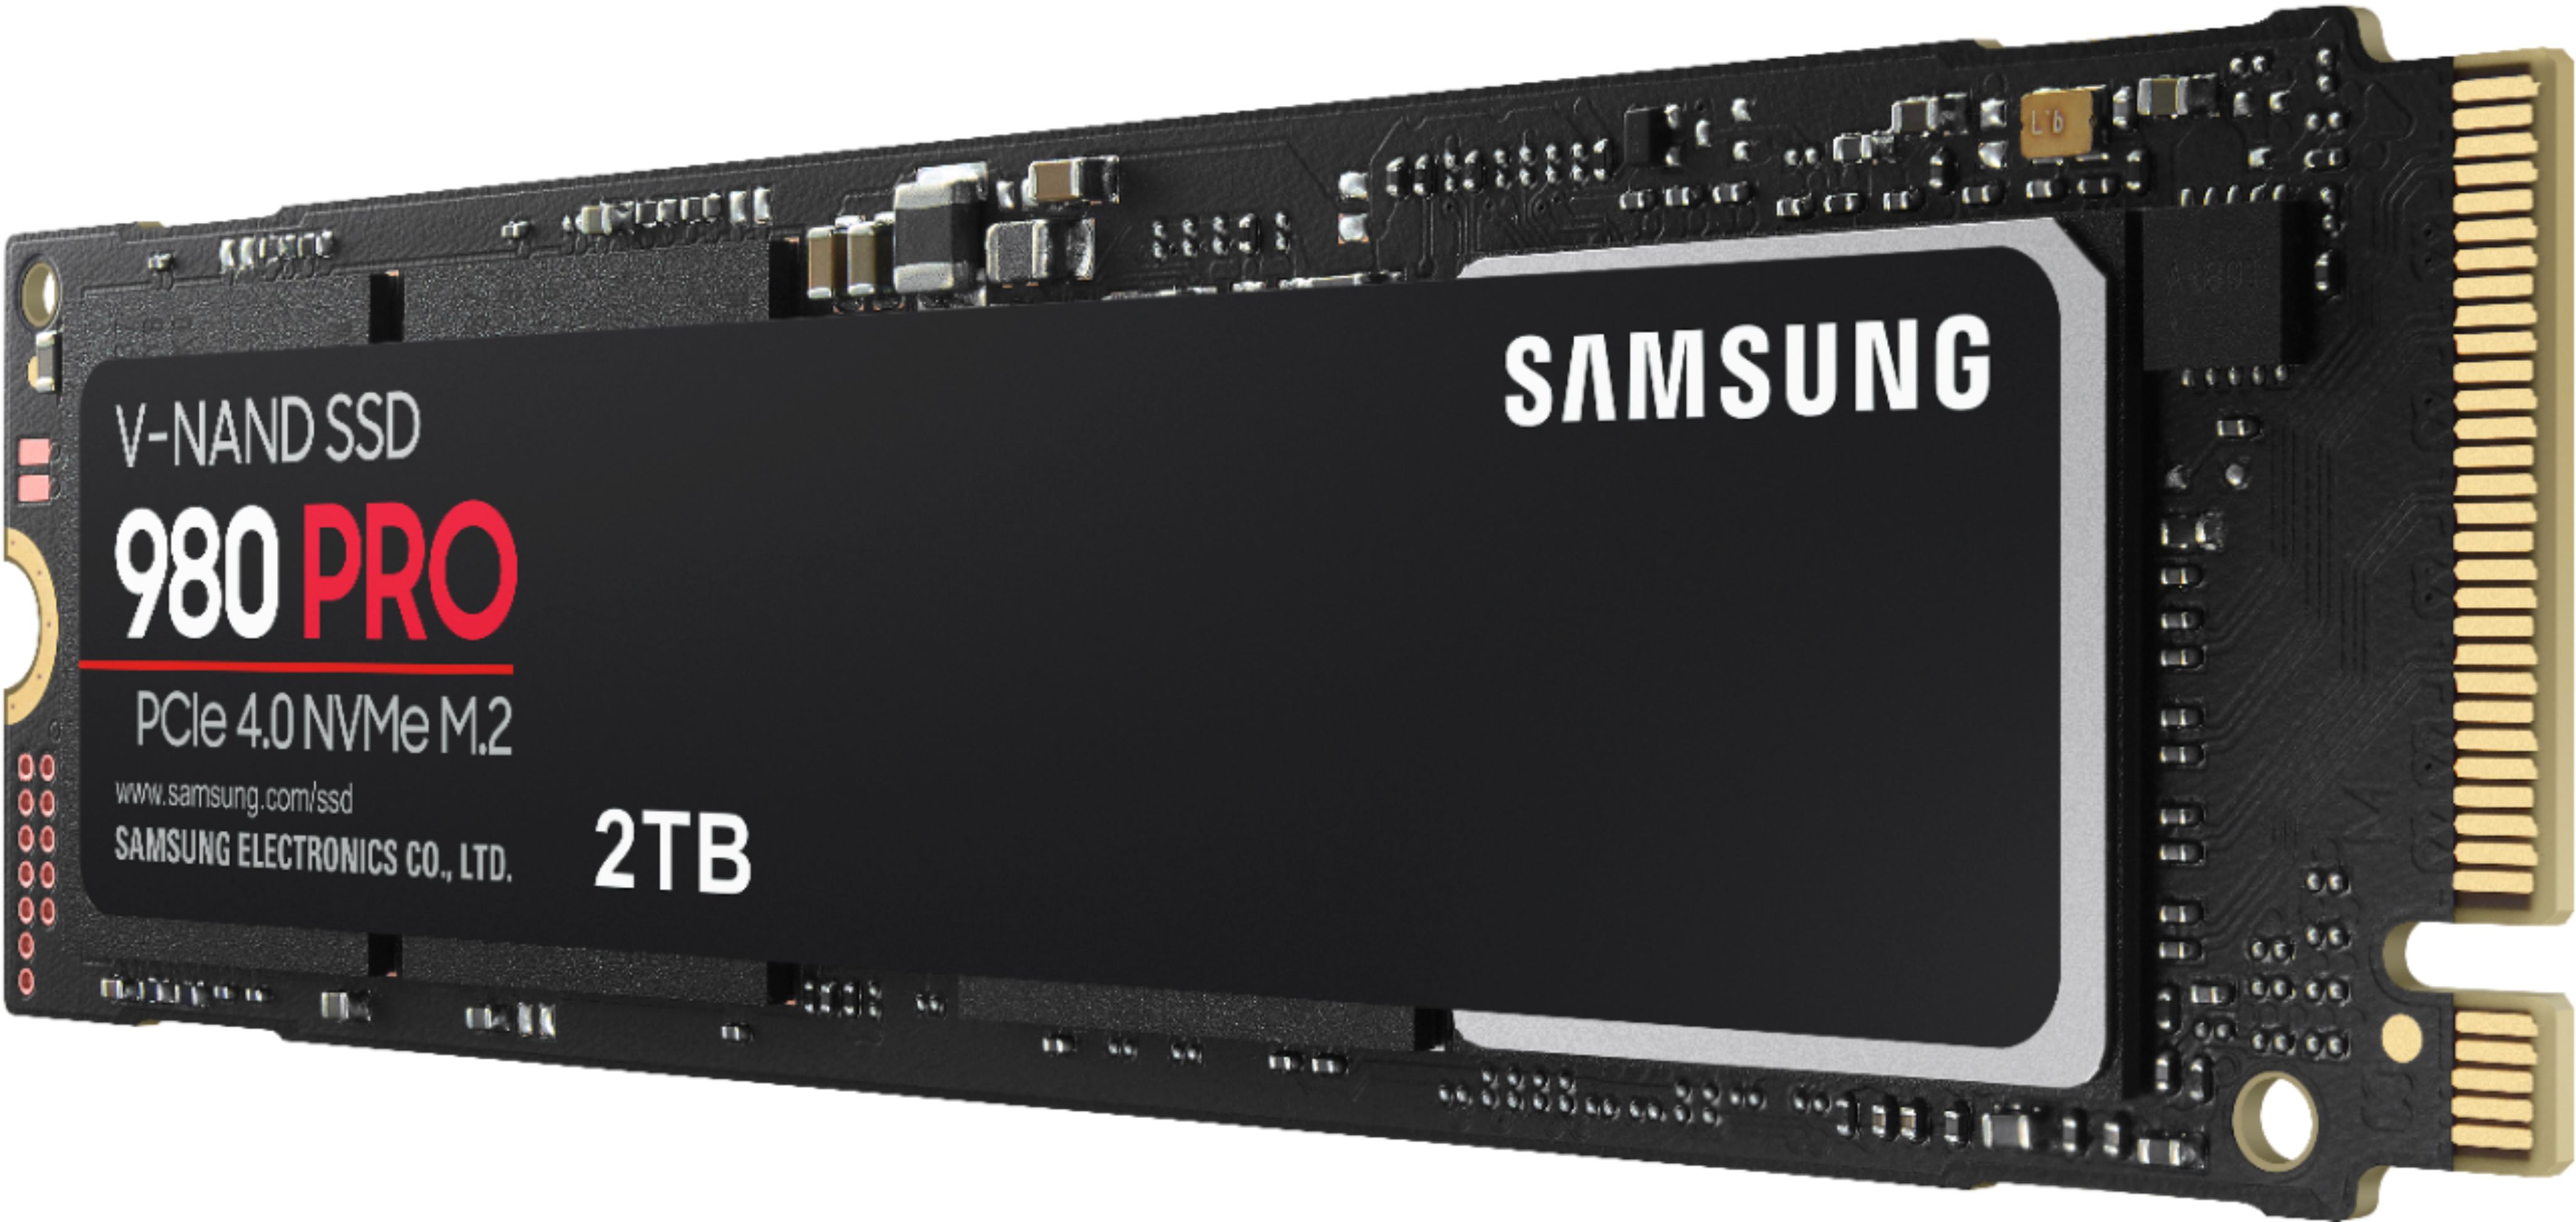 Fearless motor All kinds of Samsung 980 PRO 2TB Internal Gaming SSD PCIe Gen 4 x4 NVMe MZ-V8P2T0B/AM -  Best Buy